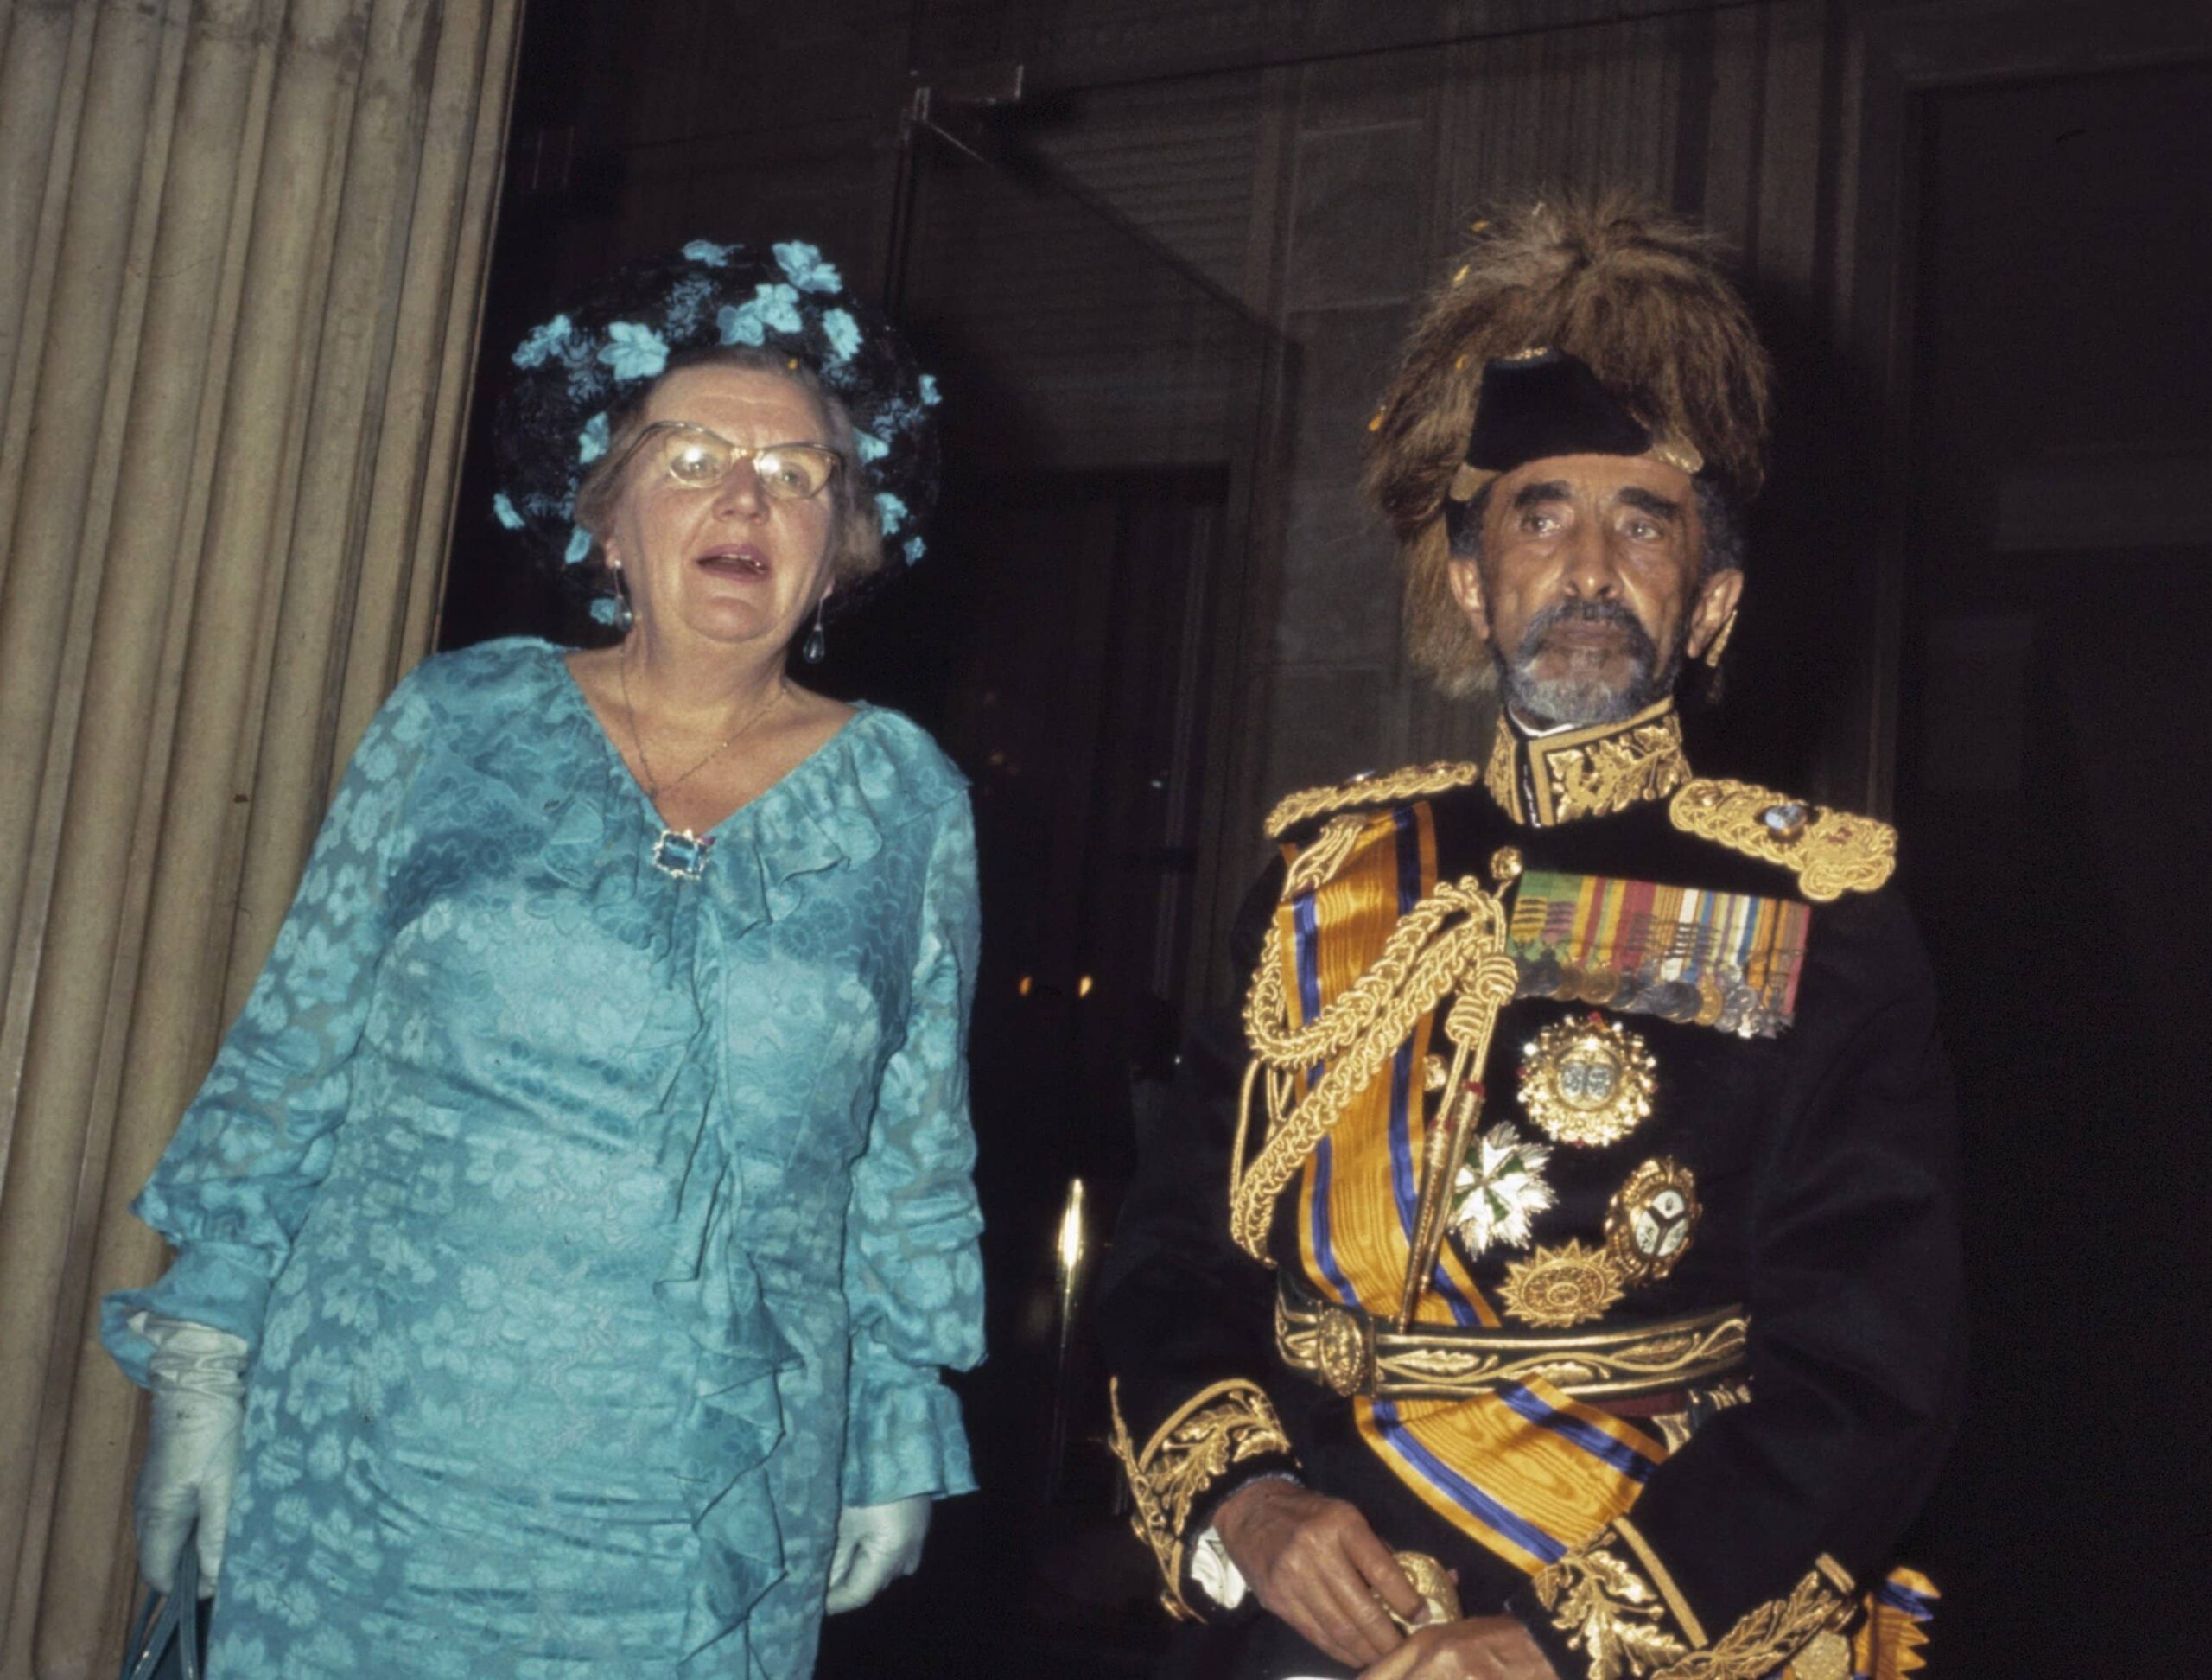 Queen Elizabeth II and the Duke of Edinburgh at the royal wedding of the Queen's nephew, the Duke of Edinburgh, to the Princess of Wales, June 12, 1981, with Haile Selassie.